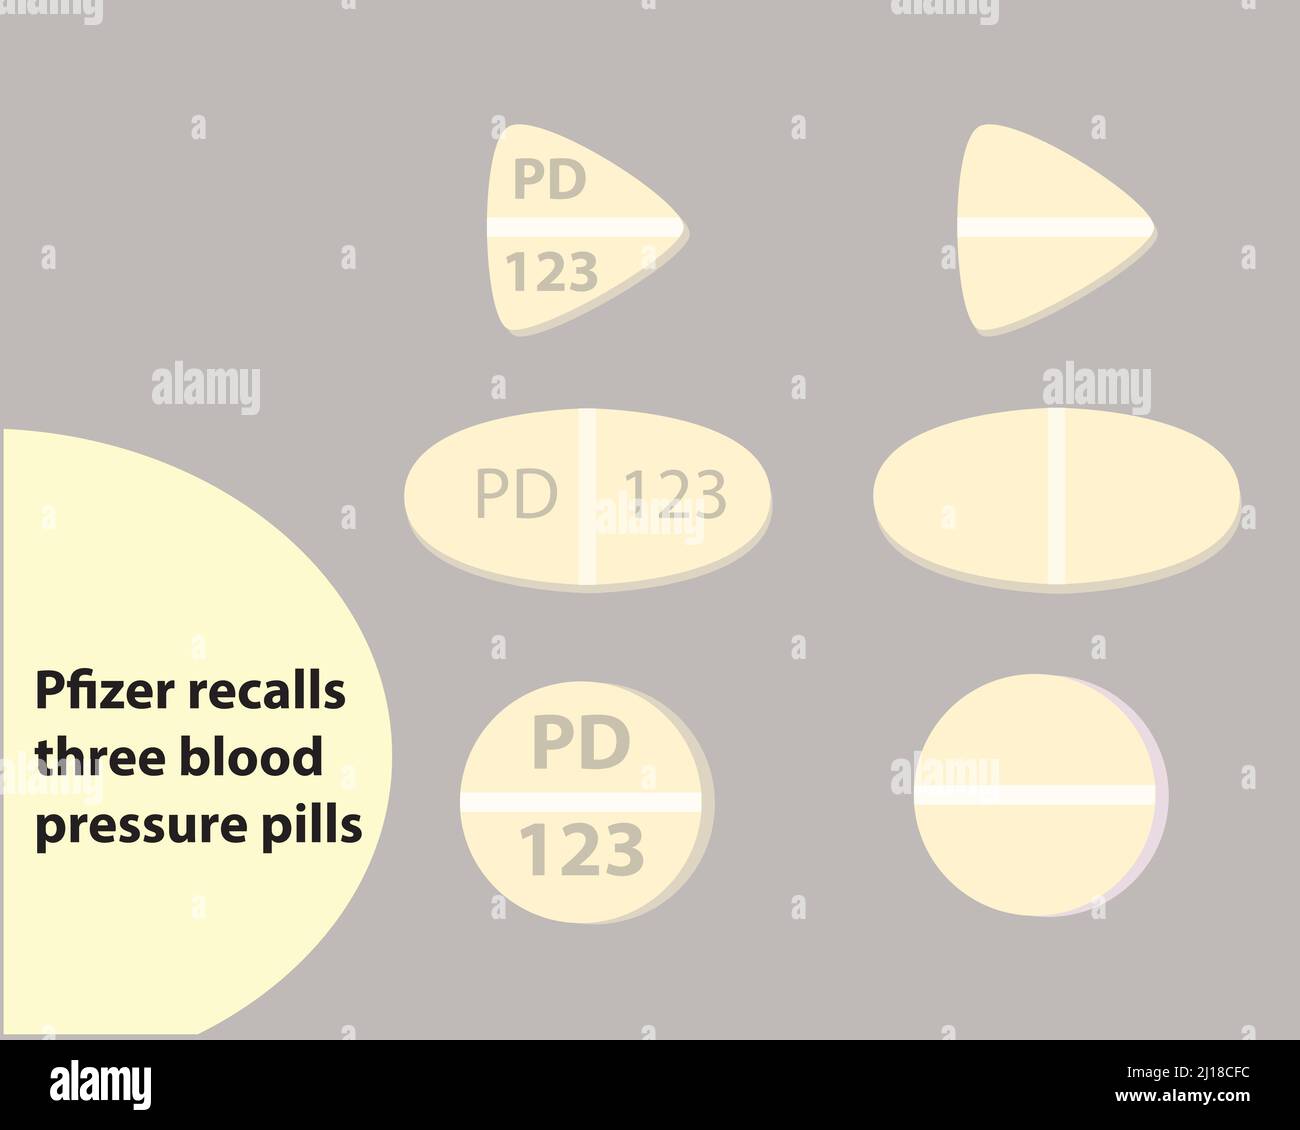 vector Pfizer recalls blood pressure drug, the design can be used for web, collection, ideas and more Stock Vector